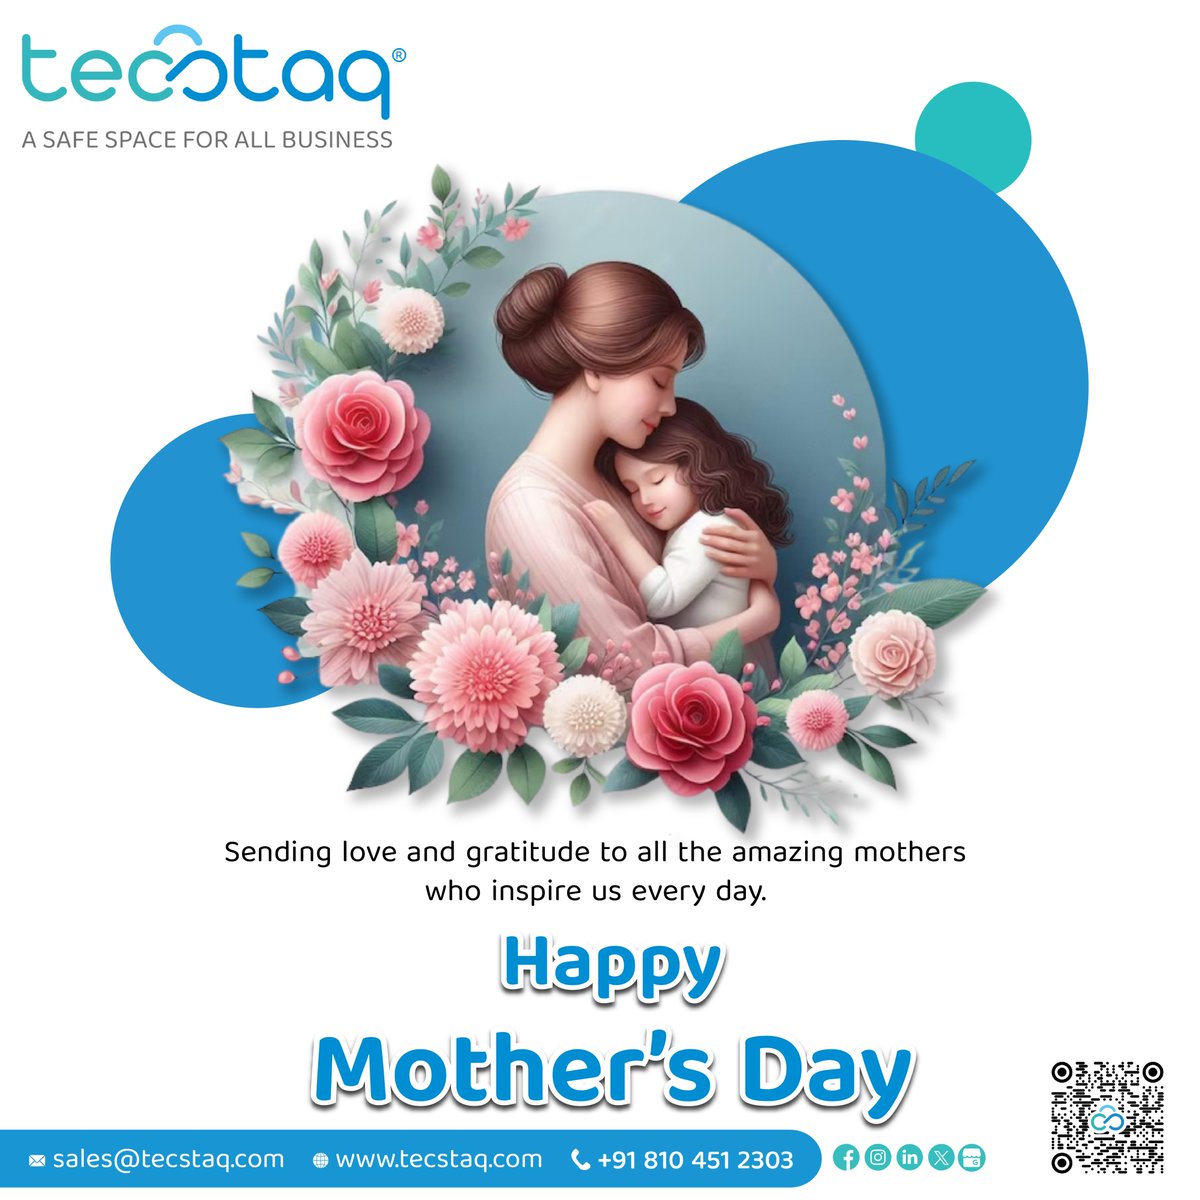 To all the mothers out there, thank you for nurturing us just like we nurture your IT needs. 𝐇𝐚𝐩𝐩𝐲 𝐌𝐨𝐭𝐡𝐞𝐫'𝐬 𝐃𝐚𝐲! #TecStaq #GreenAims #HappyMothersDay #TechSolutions #CloudComputing #MothersDay2024 #Technology #Celebration